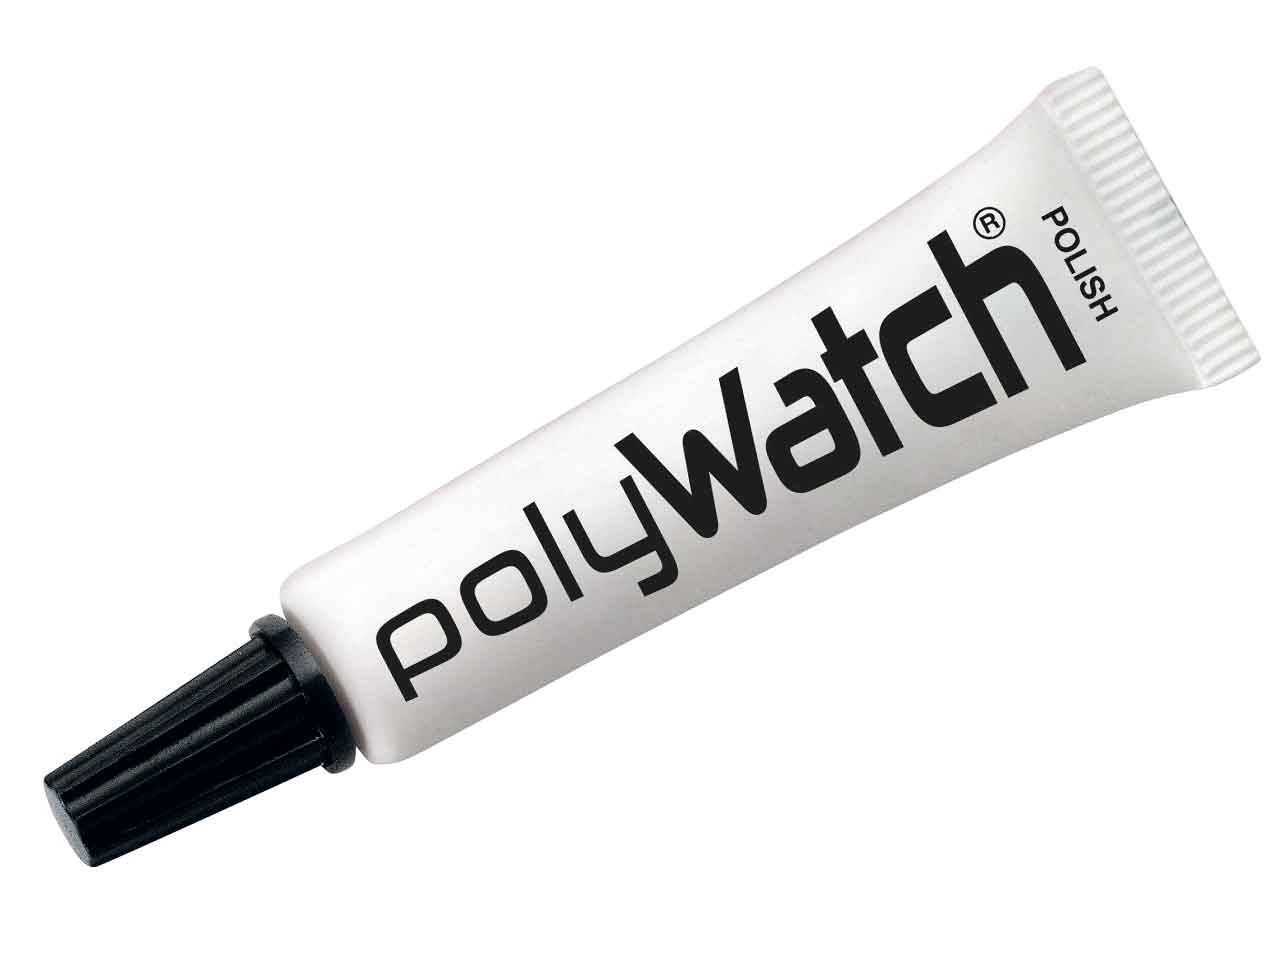 Craft + Tailored How To: PolyWatch 